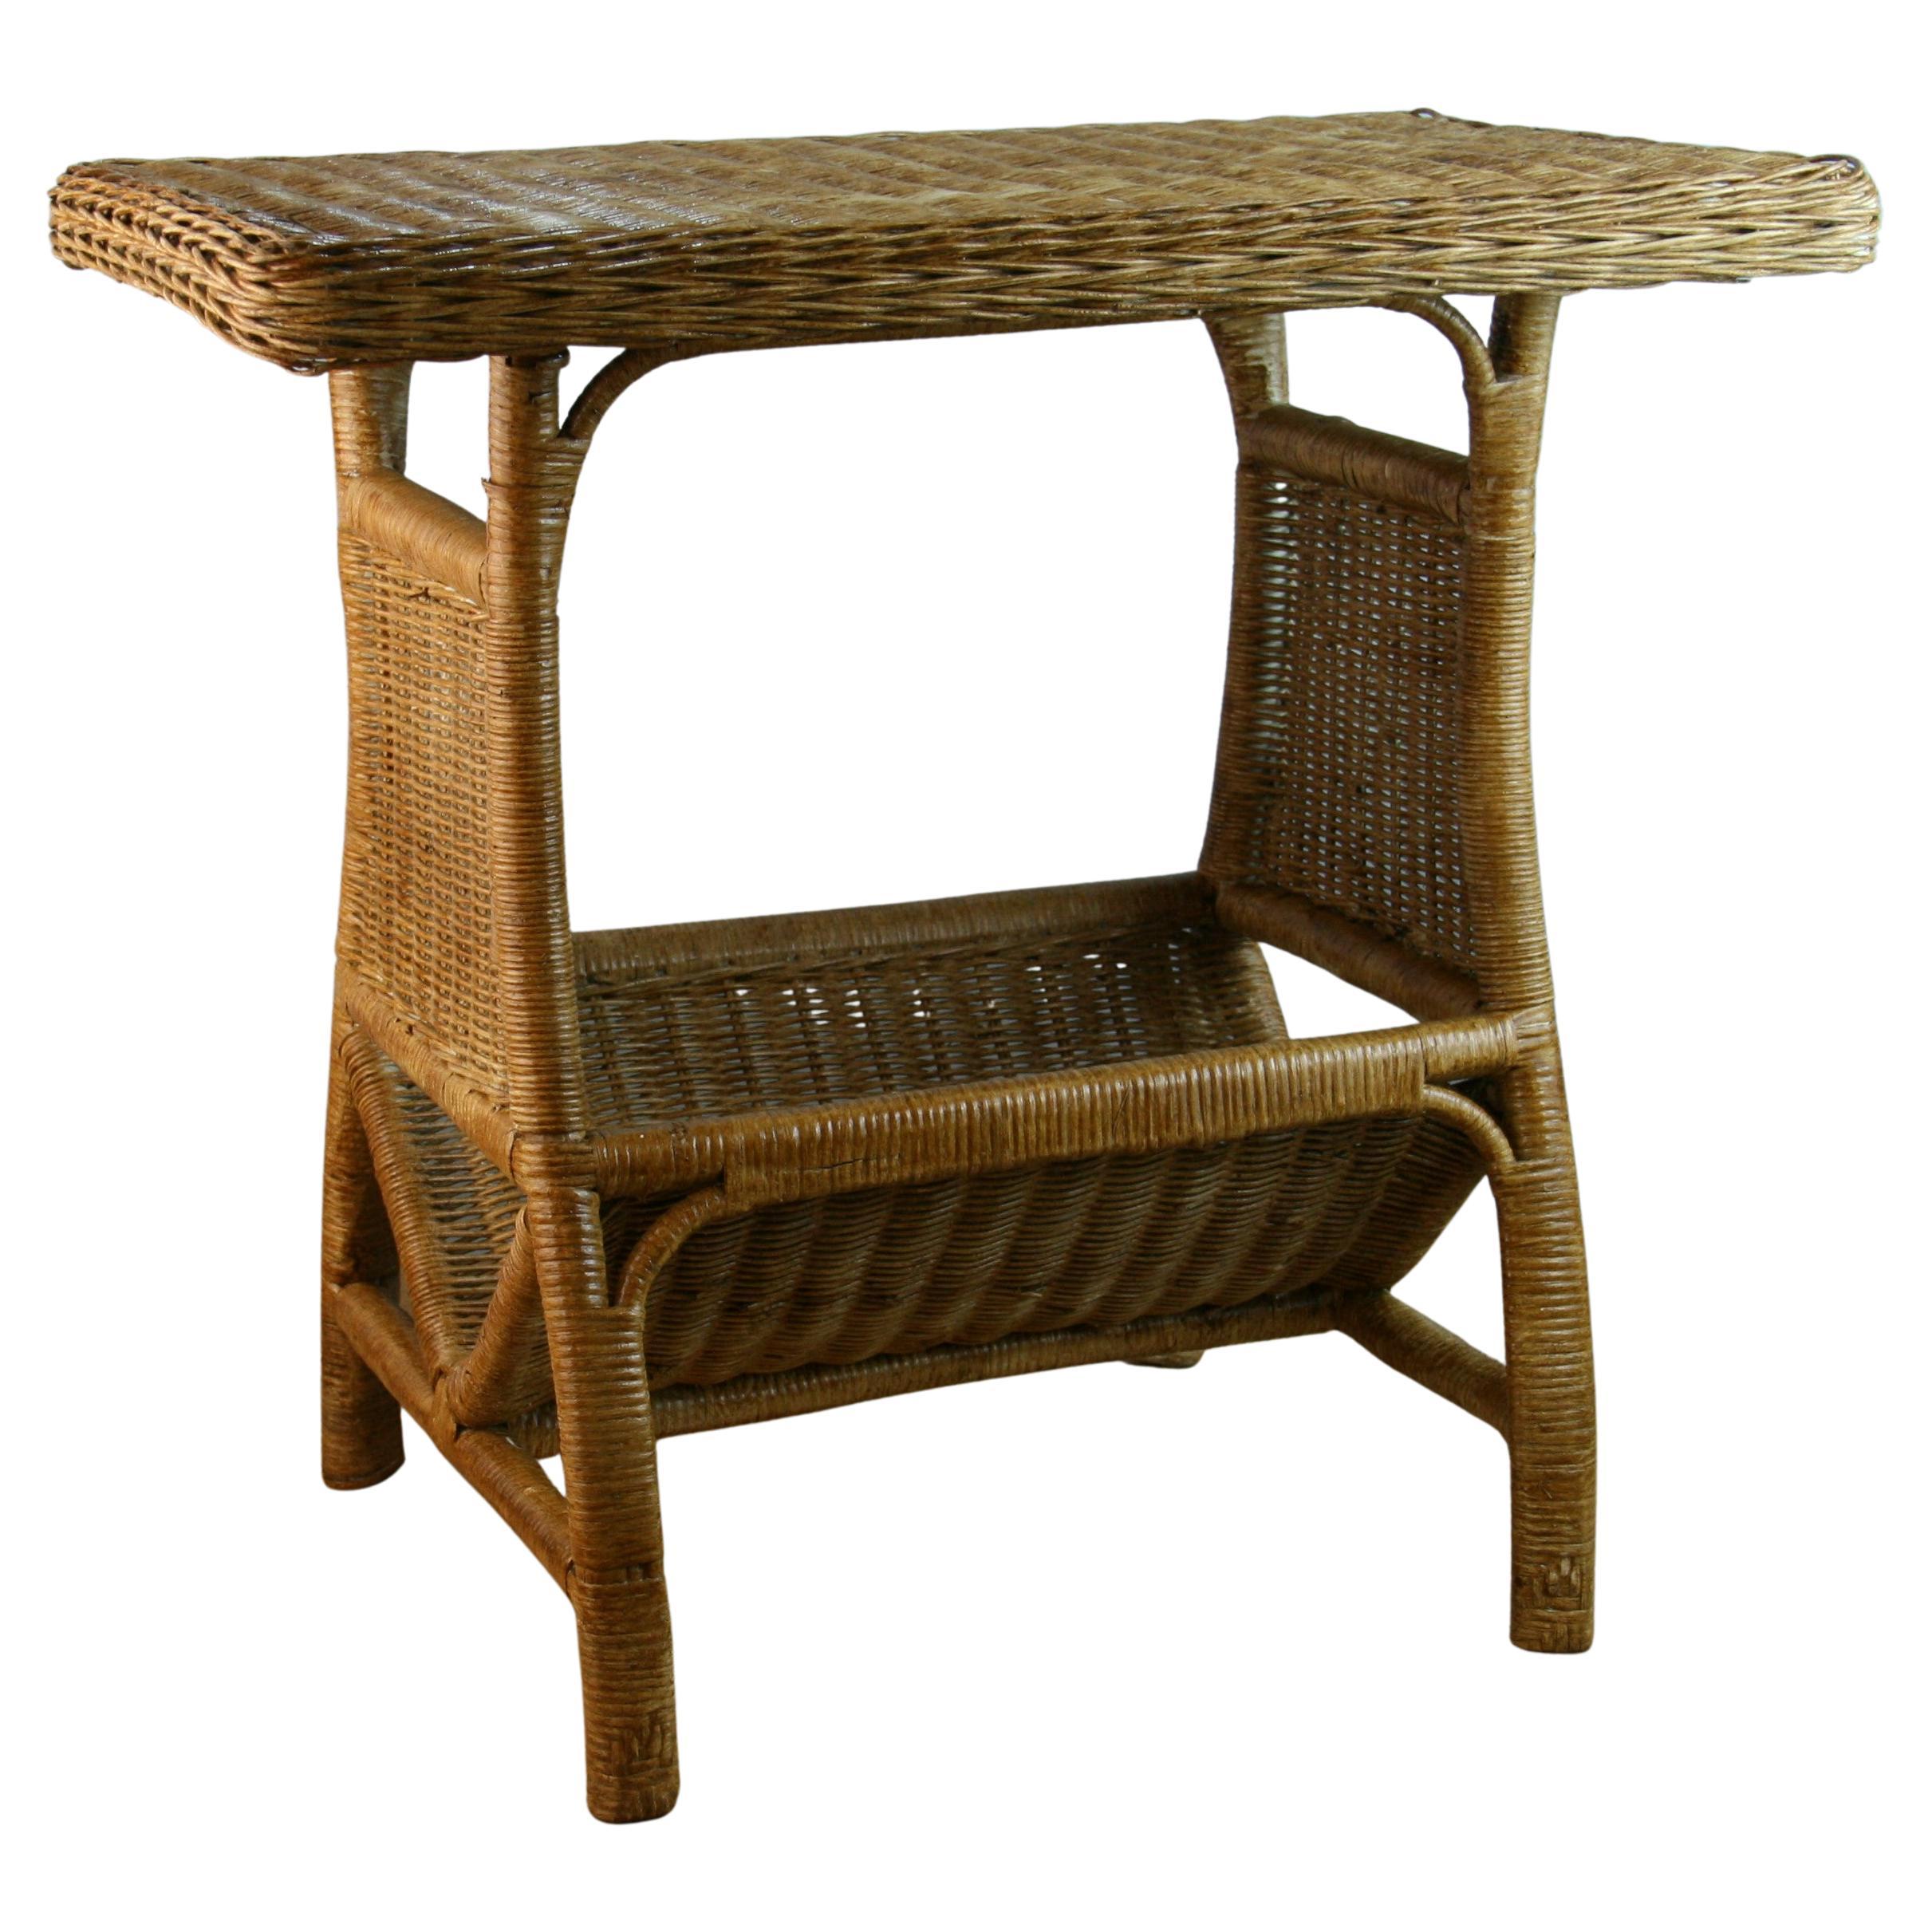 Wicker Side Table with Magazine Rack